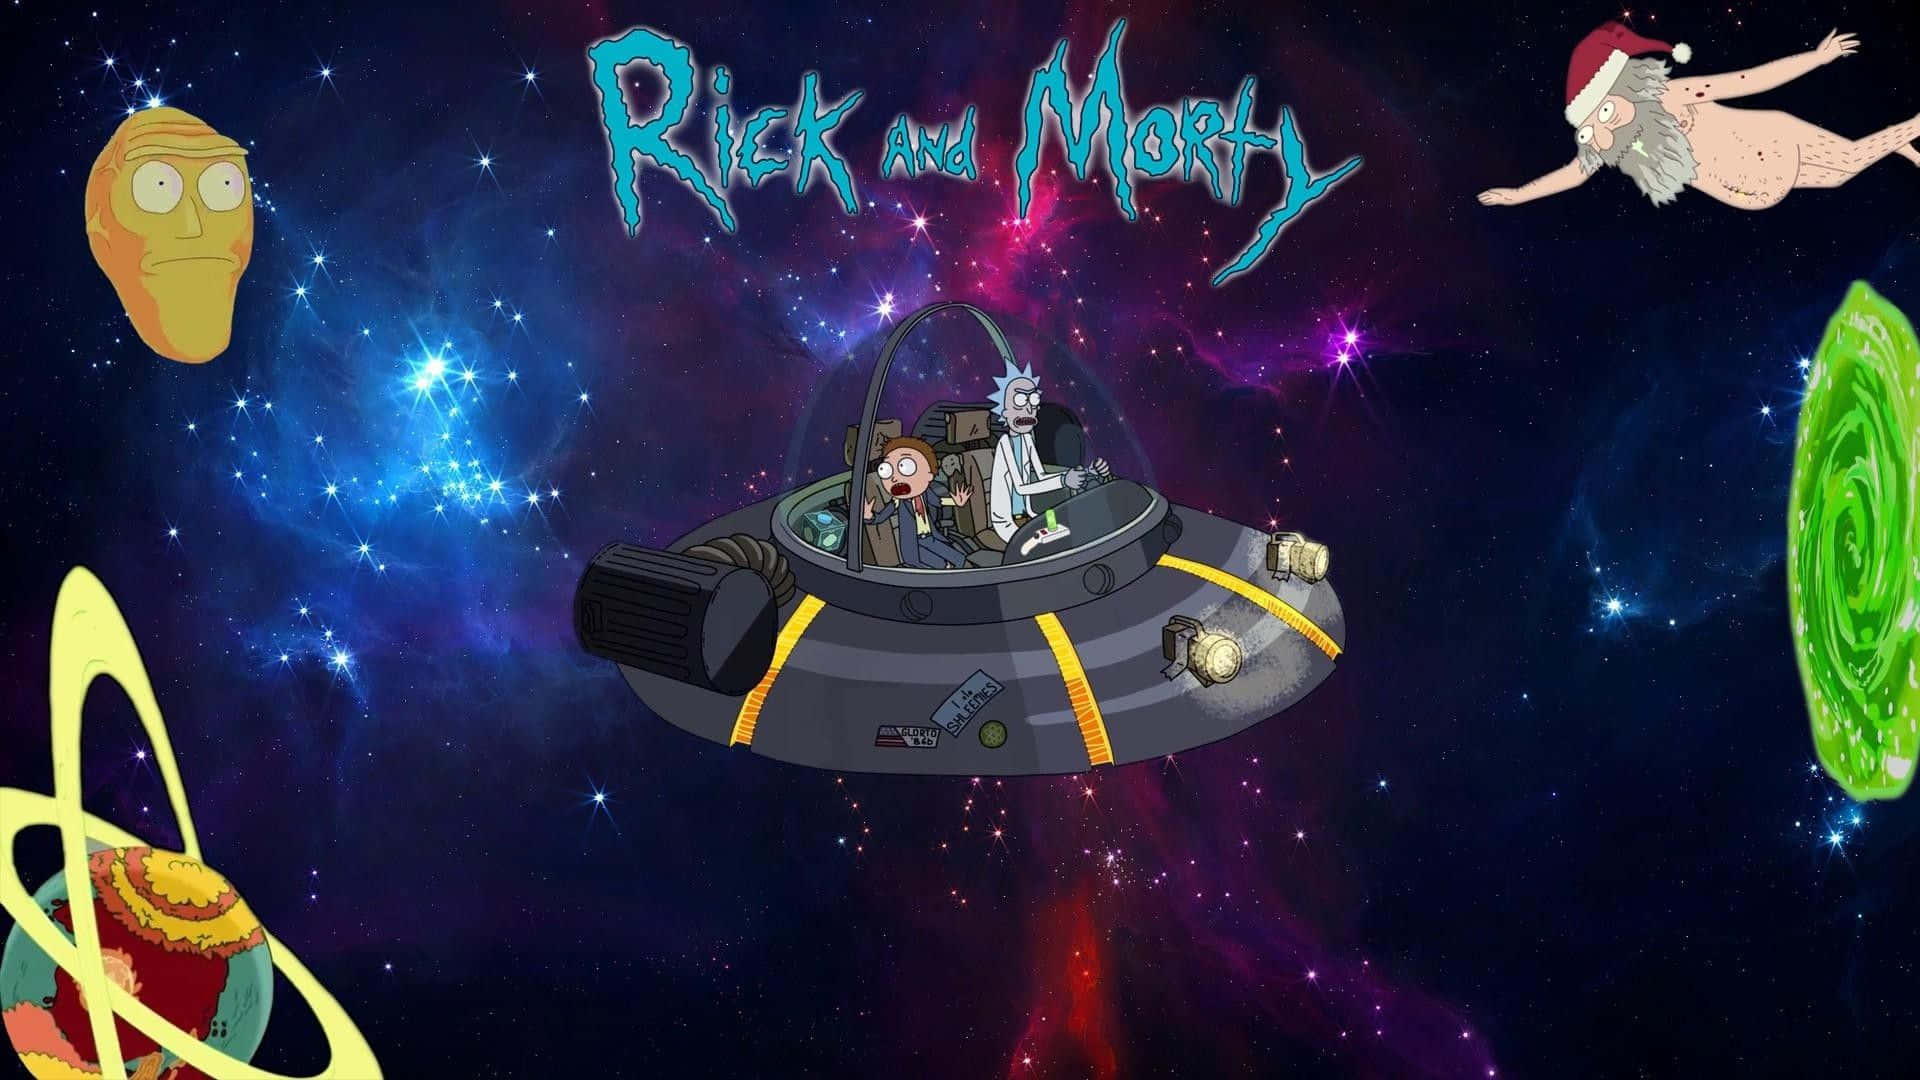 "Be cool with Rick and Morty on your laptop!" Wallpaper